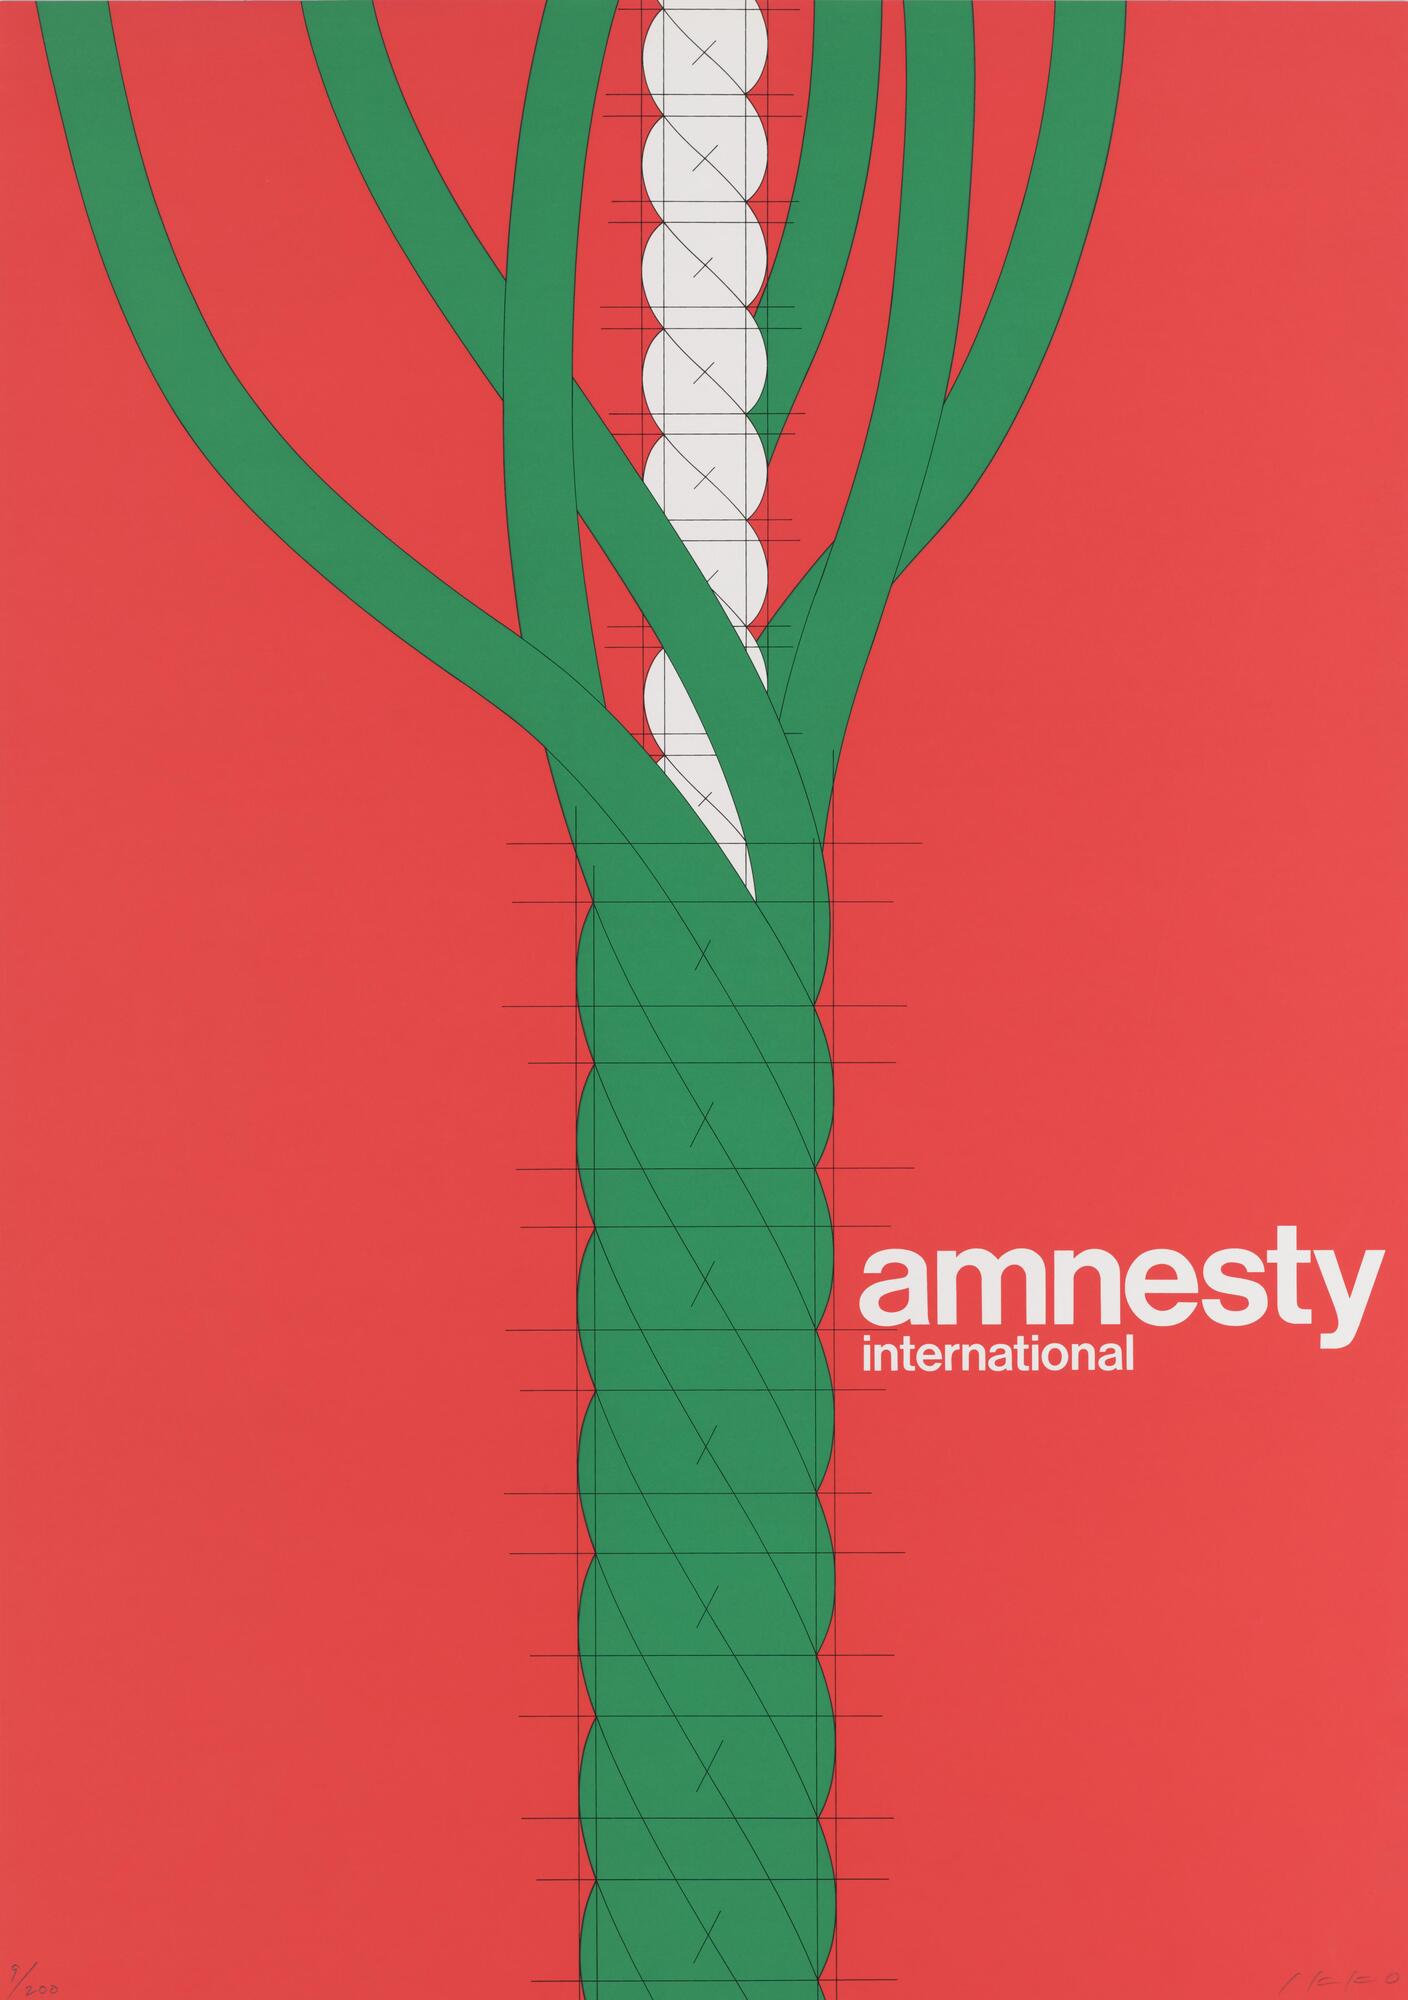 A green braided rope that unravels at the top, revealing a white interior. The text "amnesty international" is in white lettering on a red background. 